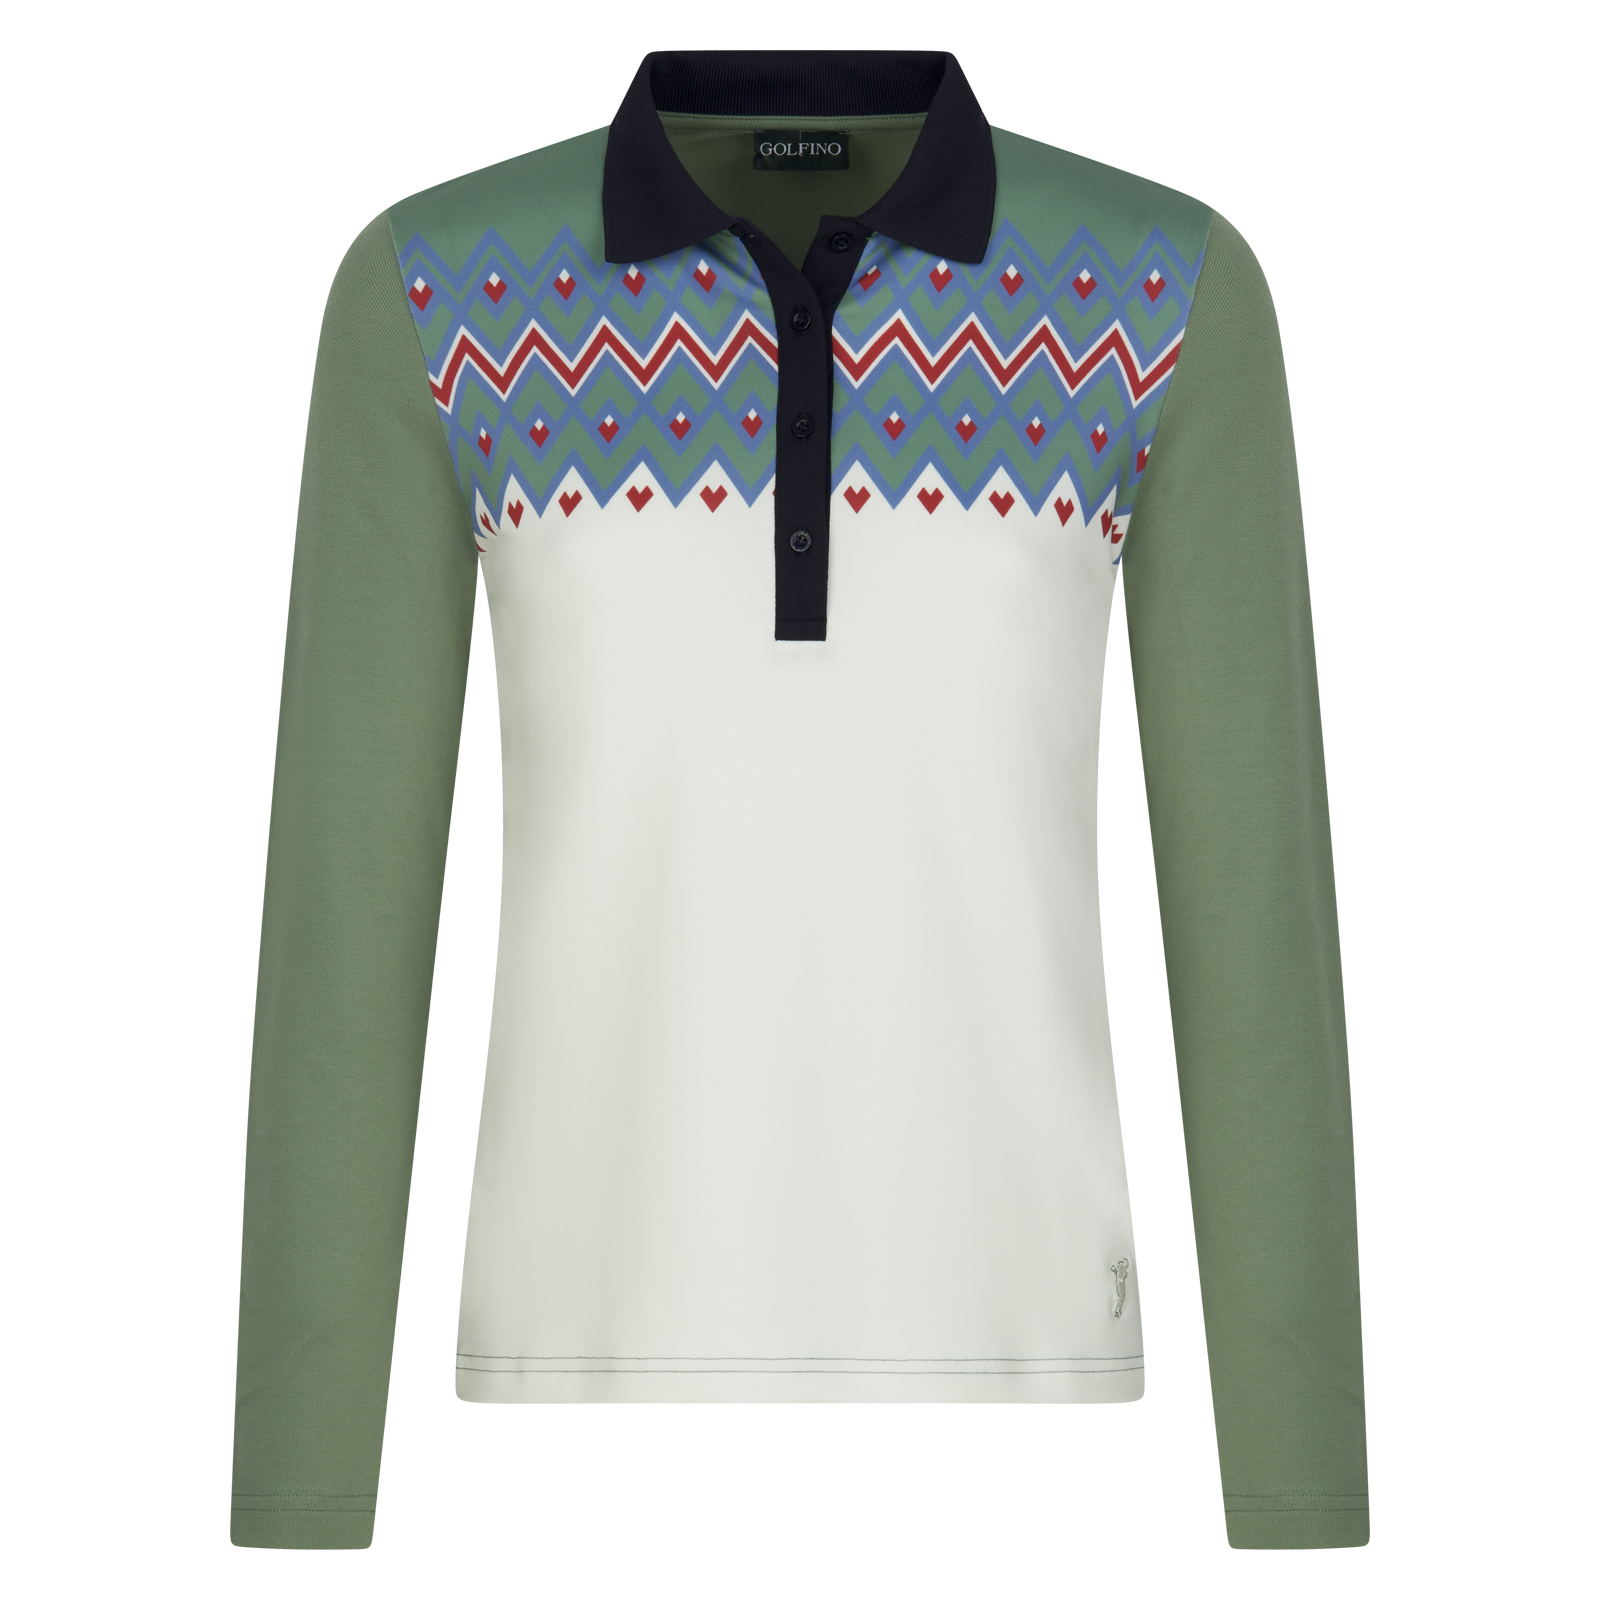 Ladies' stretch long-sleeved golf polo shirt made from sustainable materials